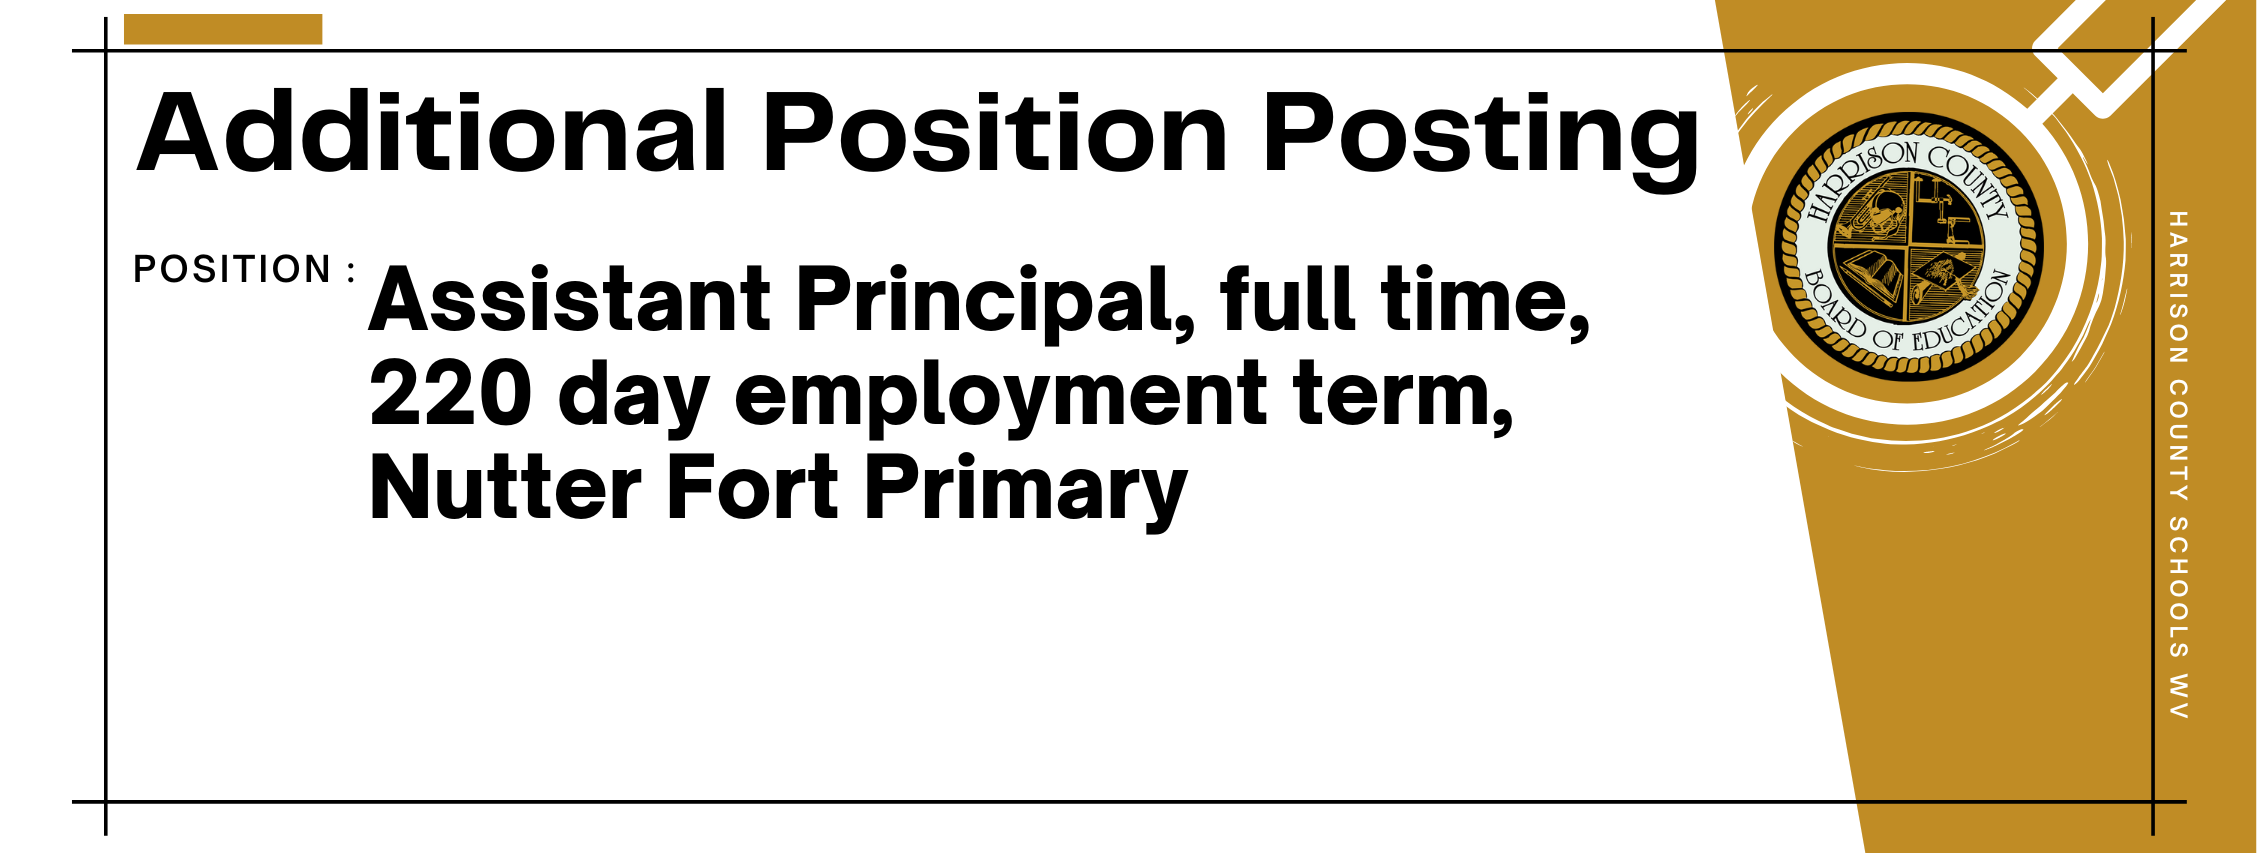 NFP Special Position: Assistant Principal